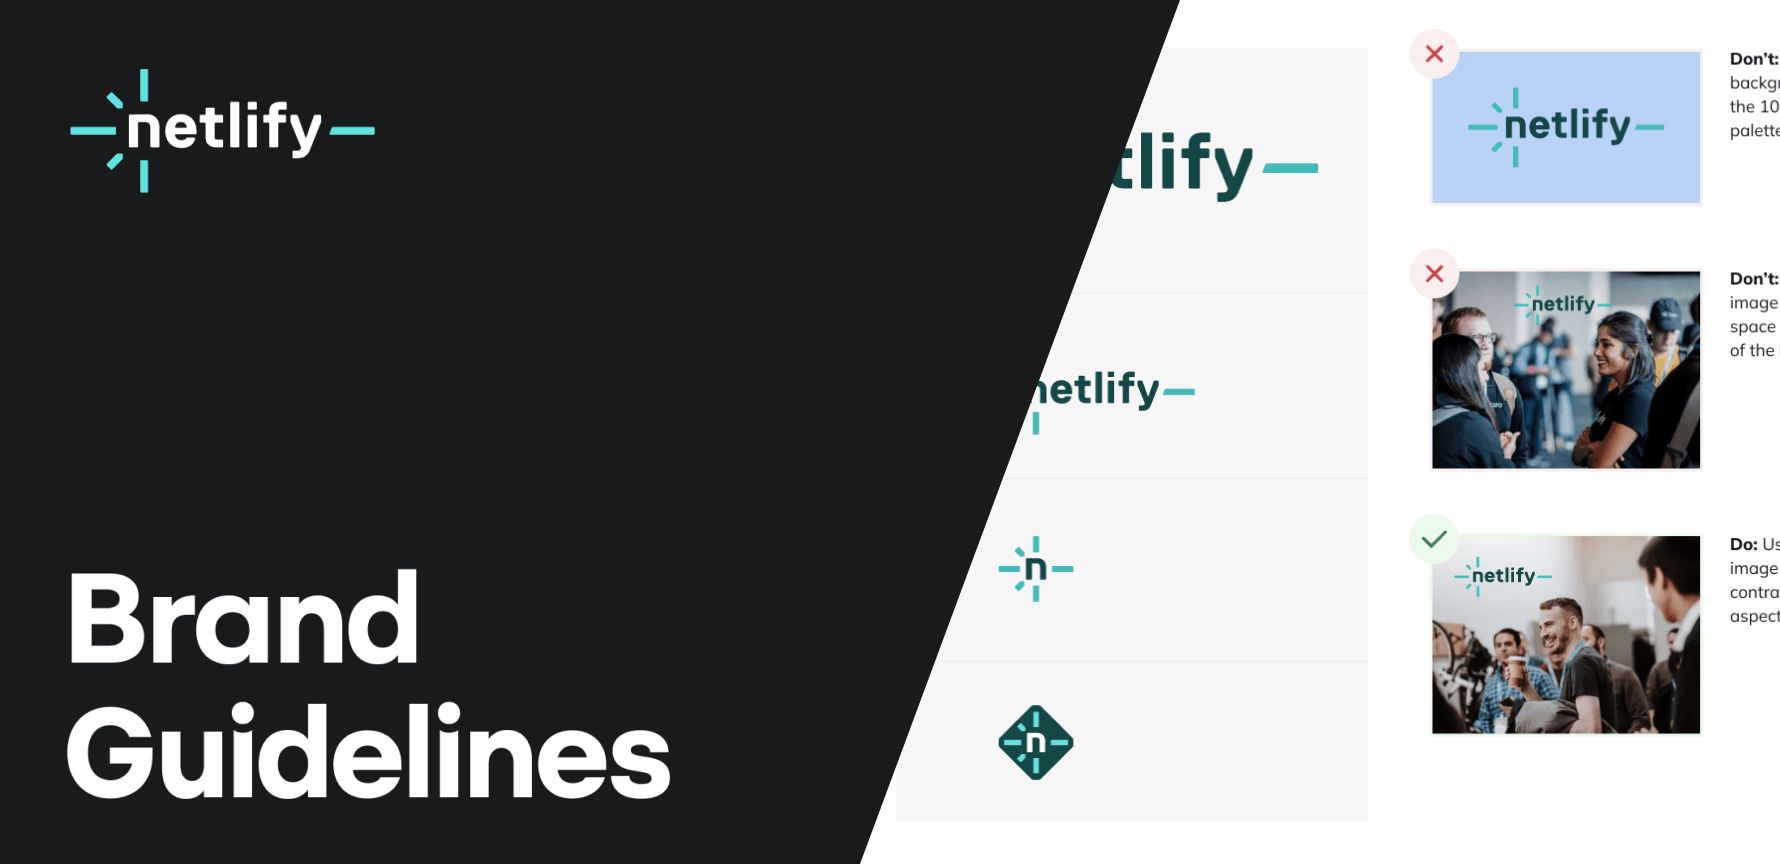 Diagnol cut out image of Netlify's Brand Guidelines